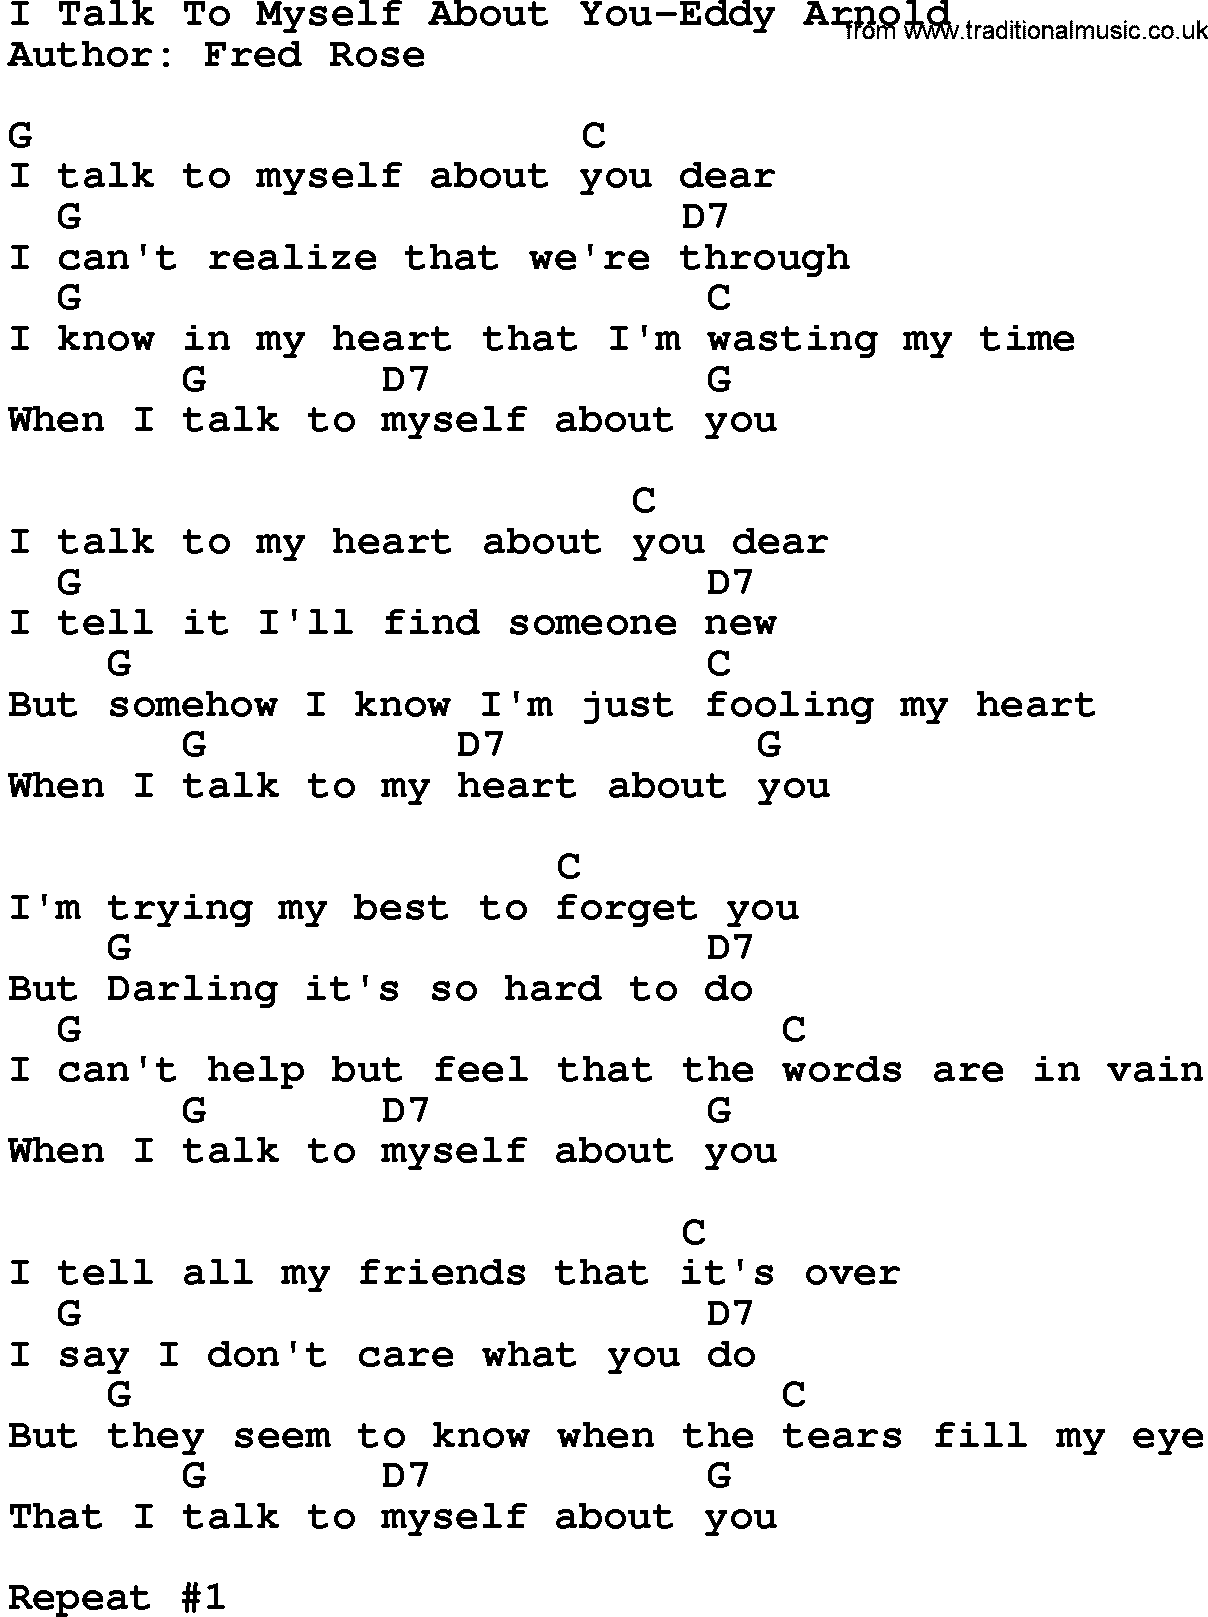 Country music song: I Talk To Myself About You-Eddy Arnold lyrics and chords